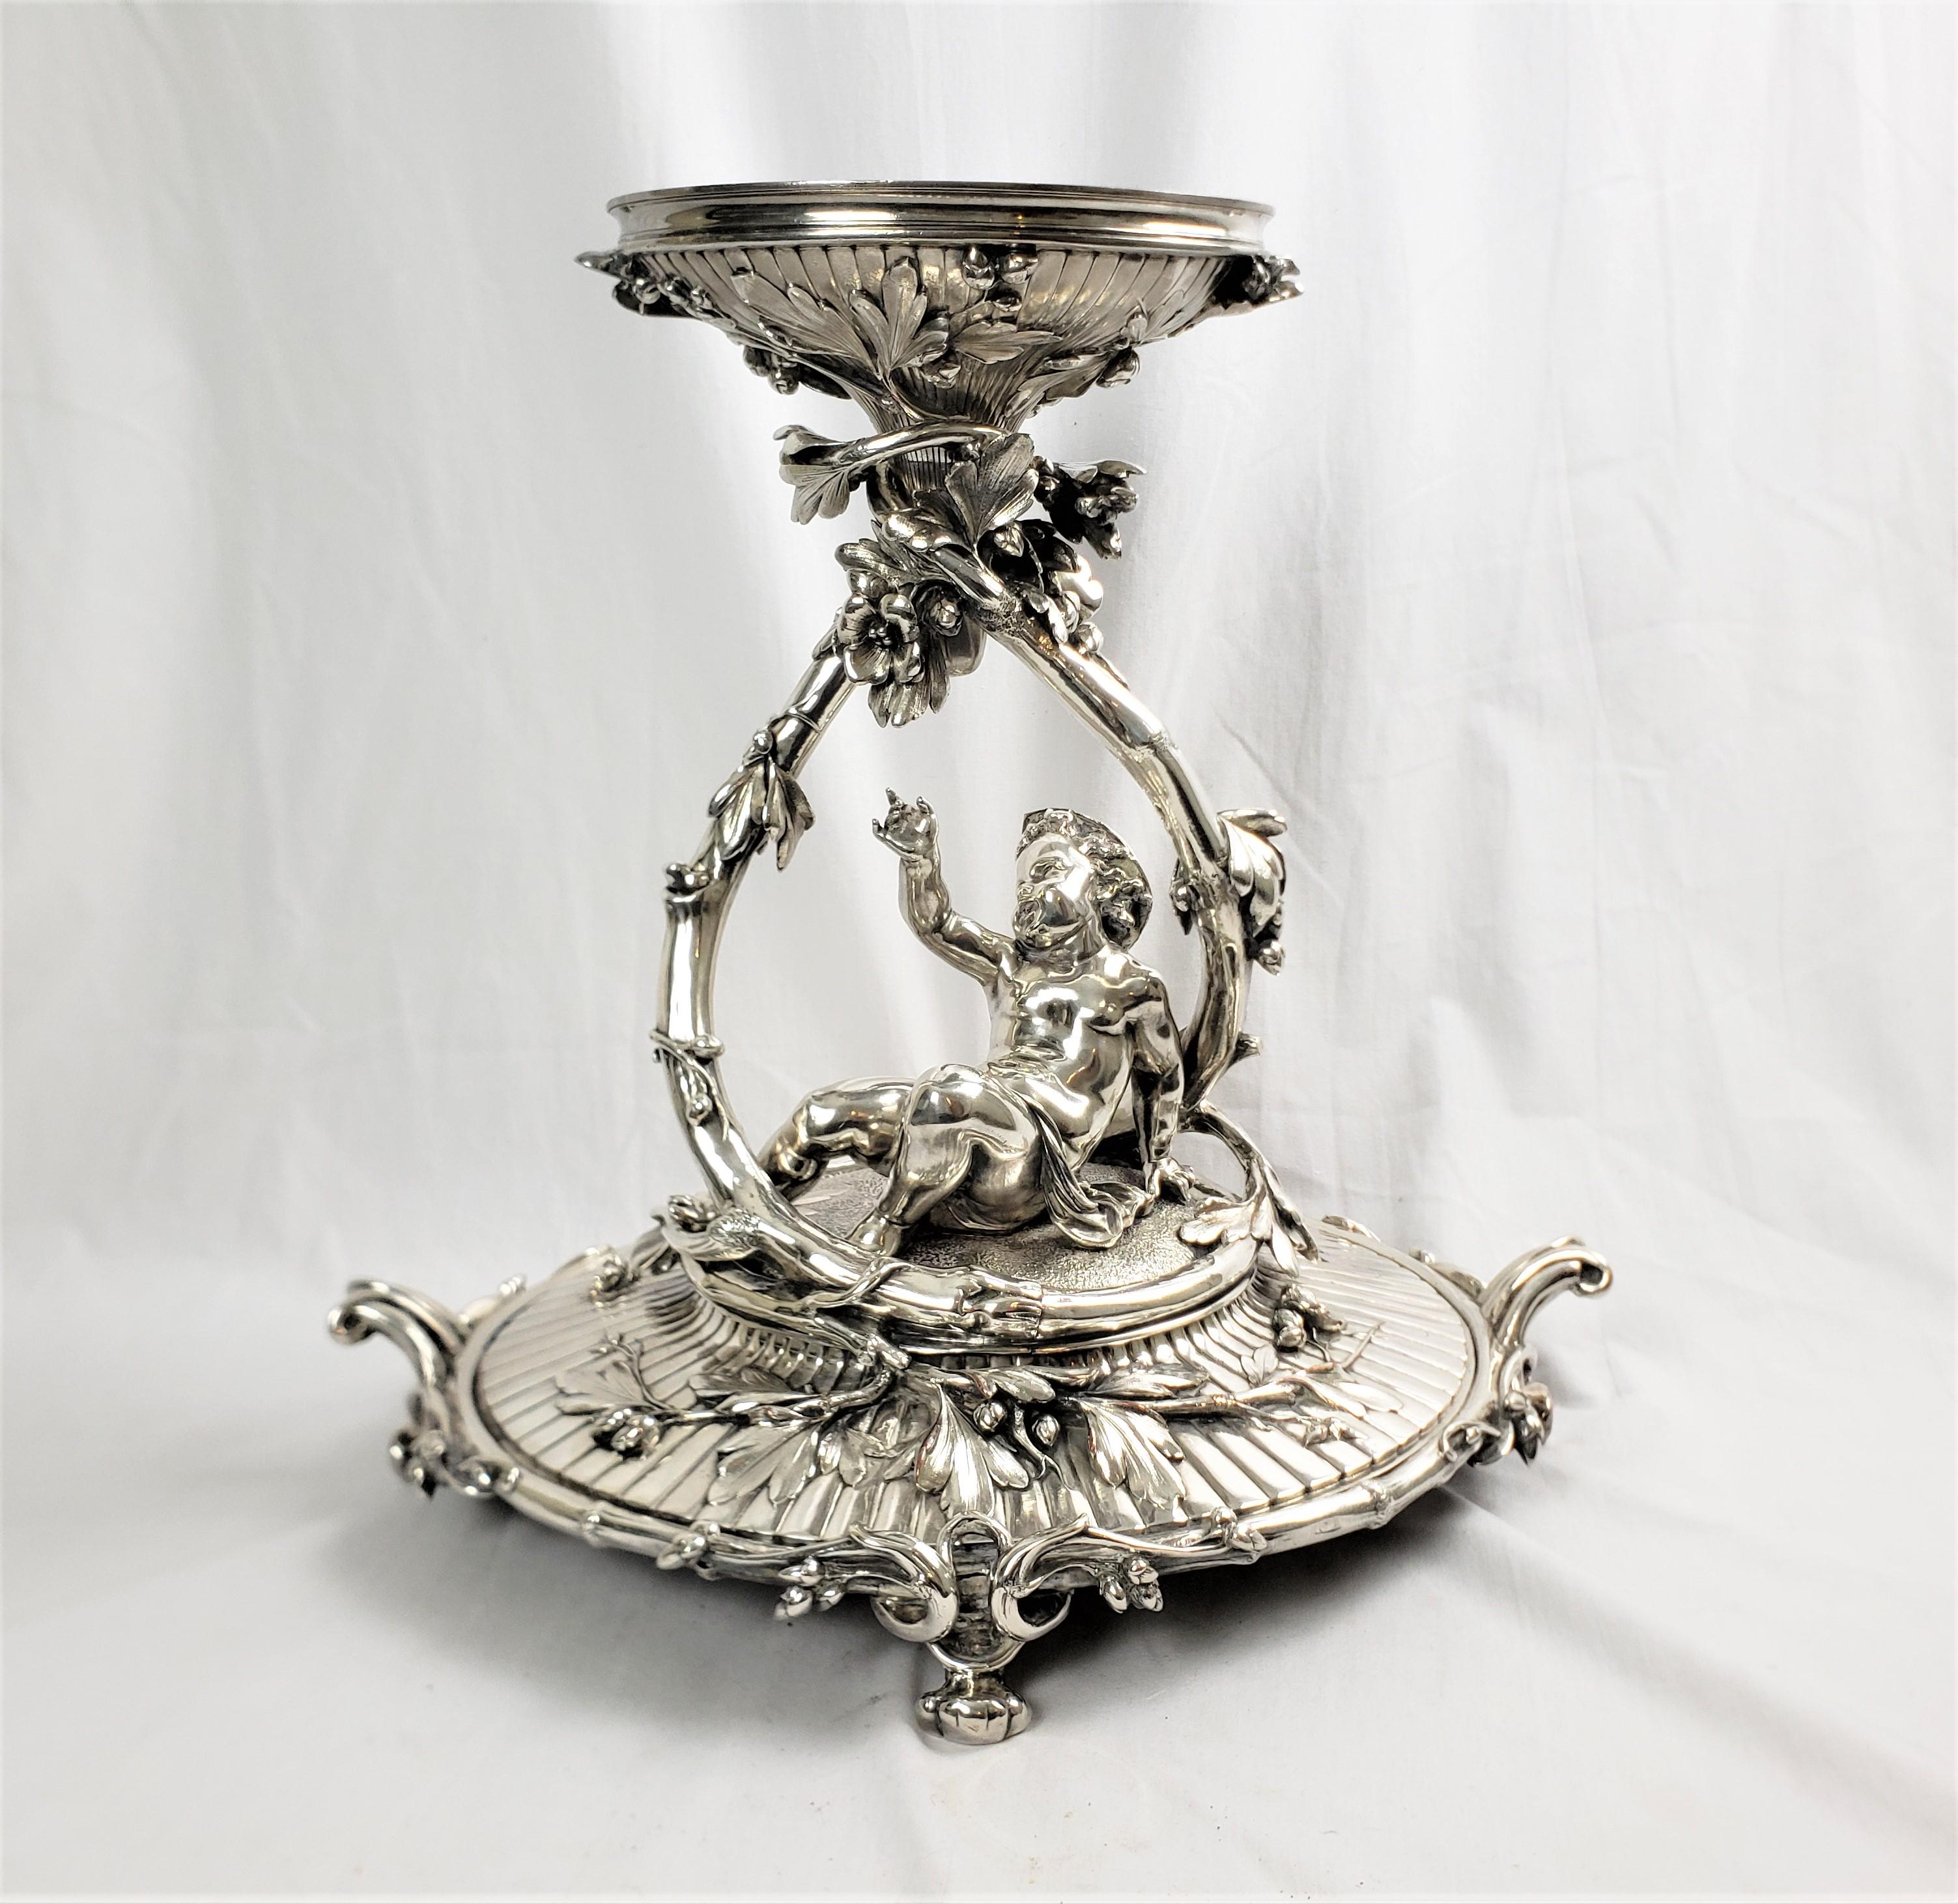 This very large and substantial antique centerpiece was made by the well known Christofle company of France in approximately 1880 in the period Victorian style. The centerpiece is composed of silver plate over copper and depicts a young child